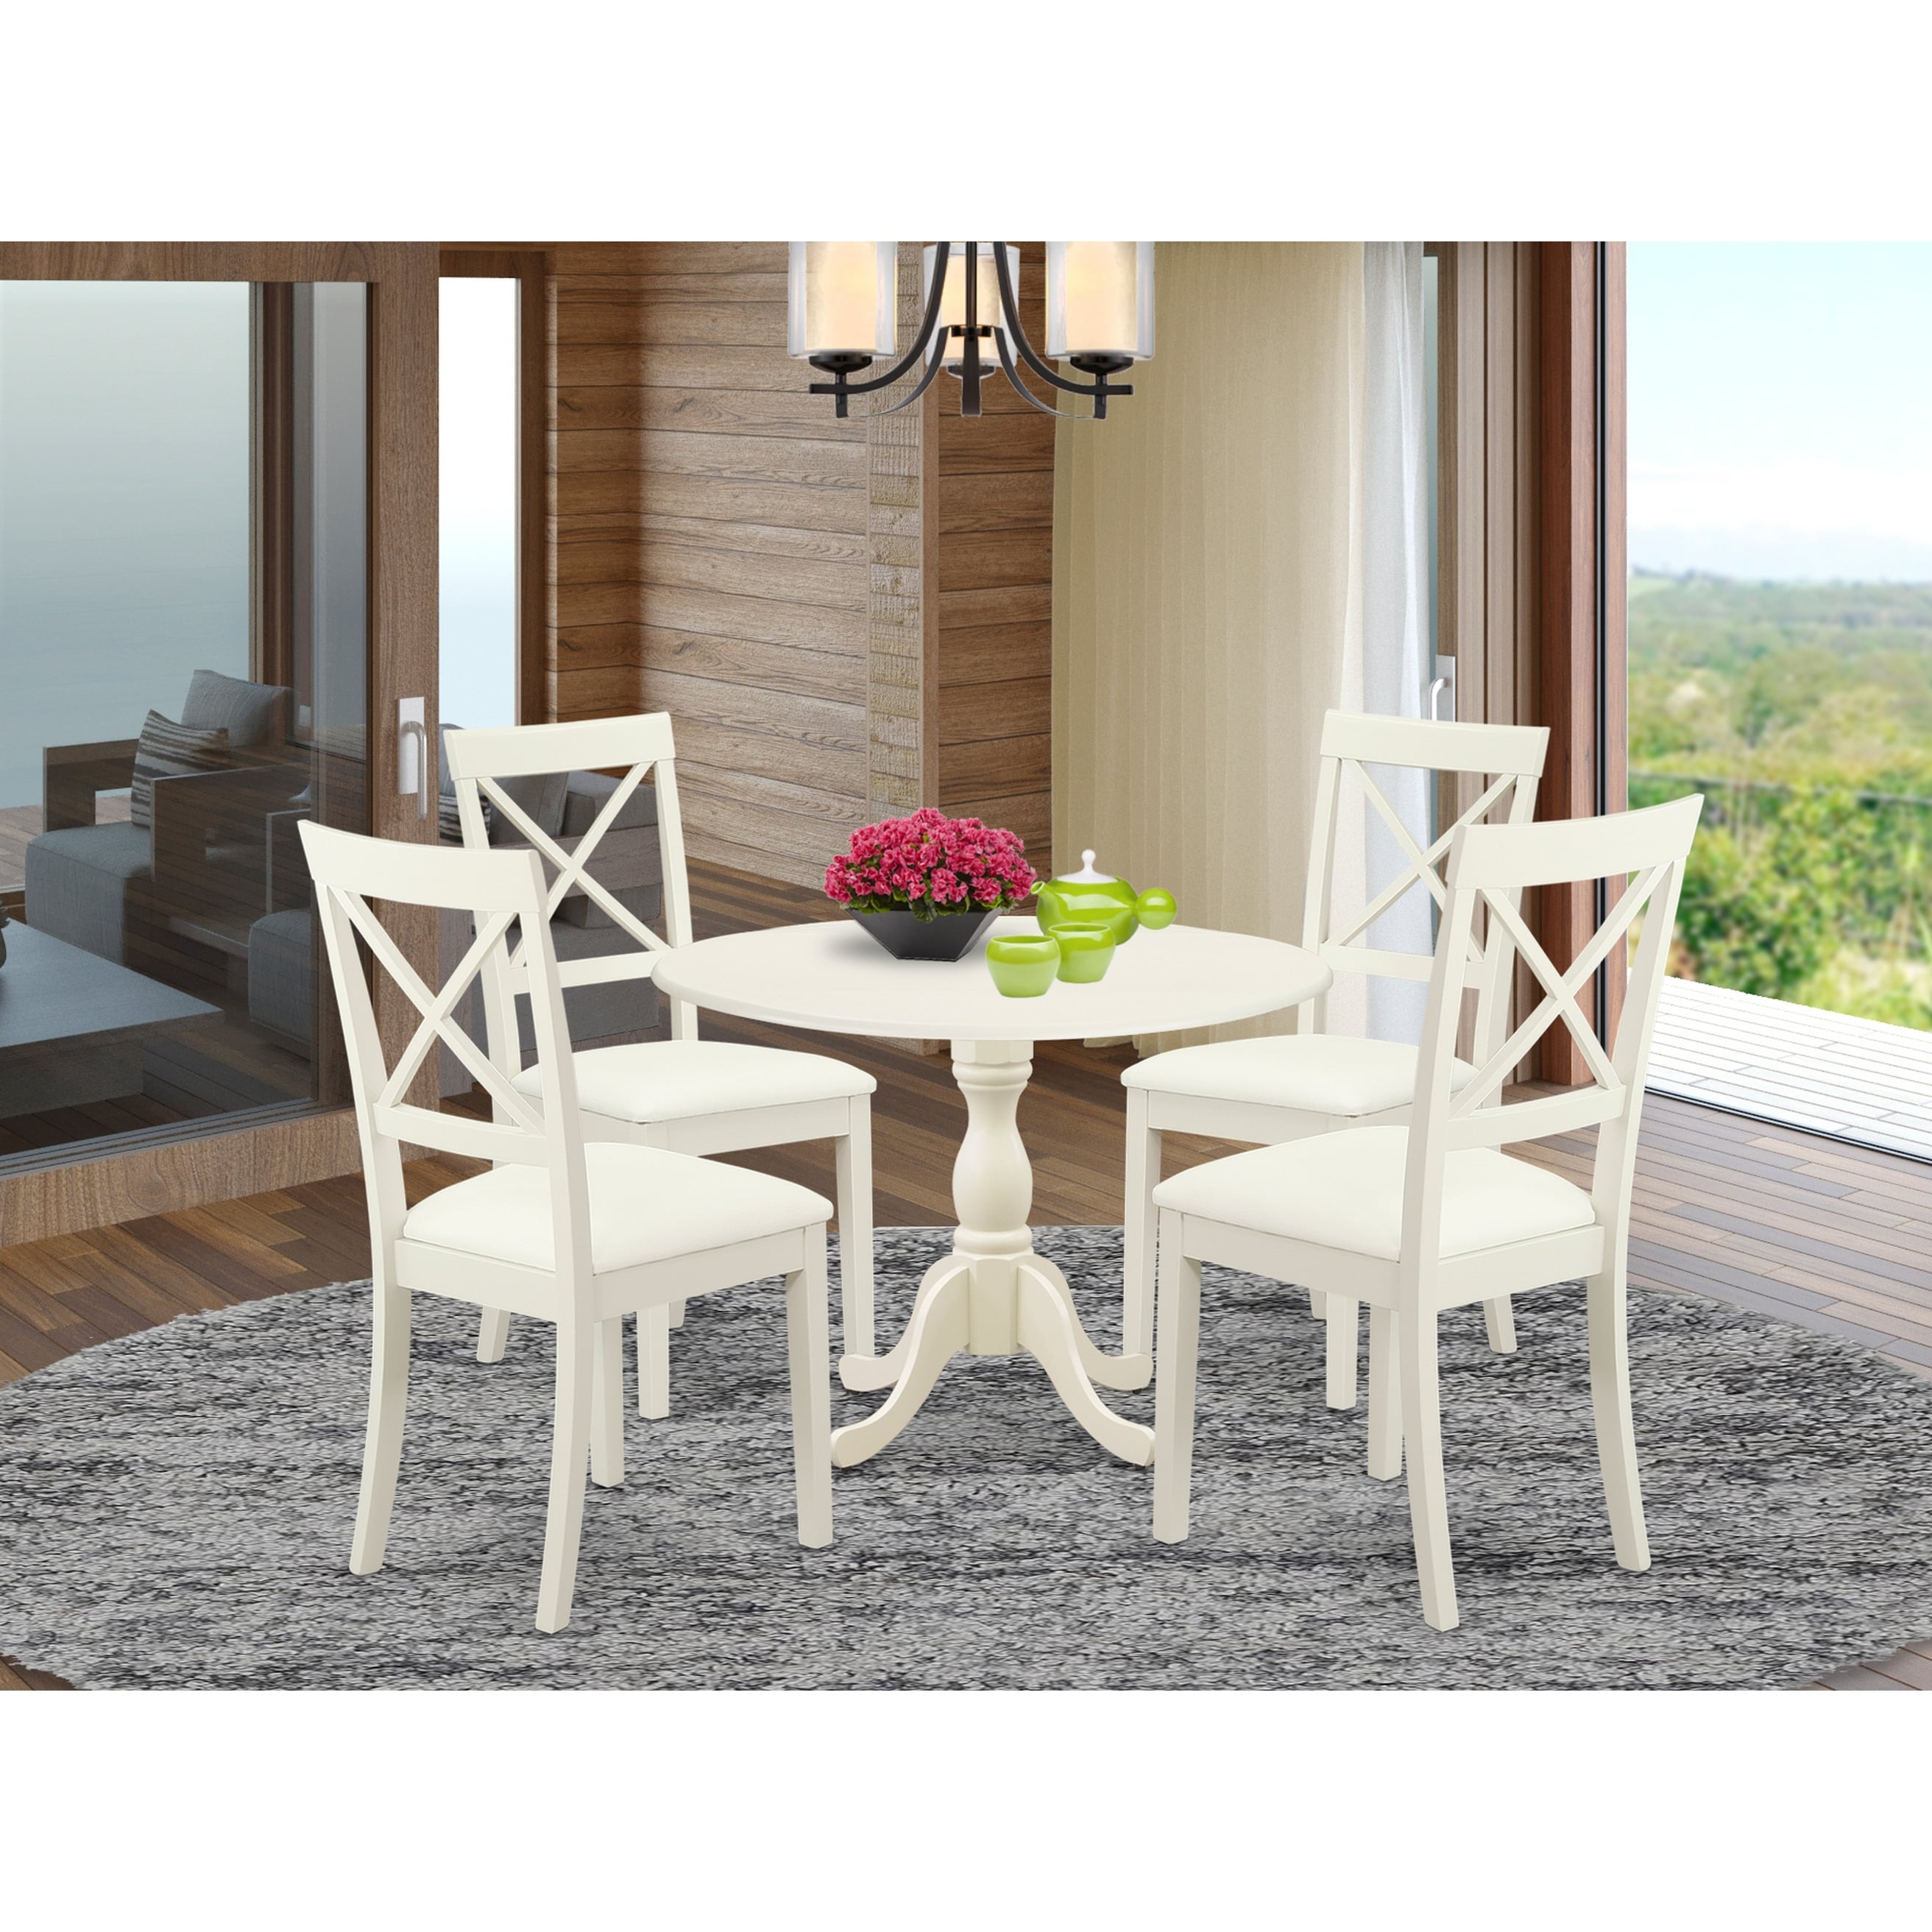 East West Furniture Round Kitchen Table with Drop Leaves - Linen White Table Top and Black Pedestal Leg Finish